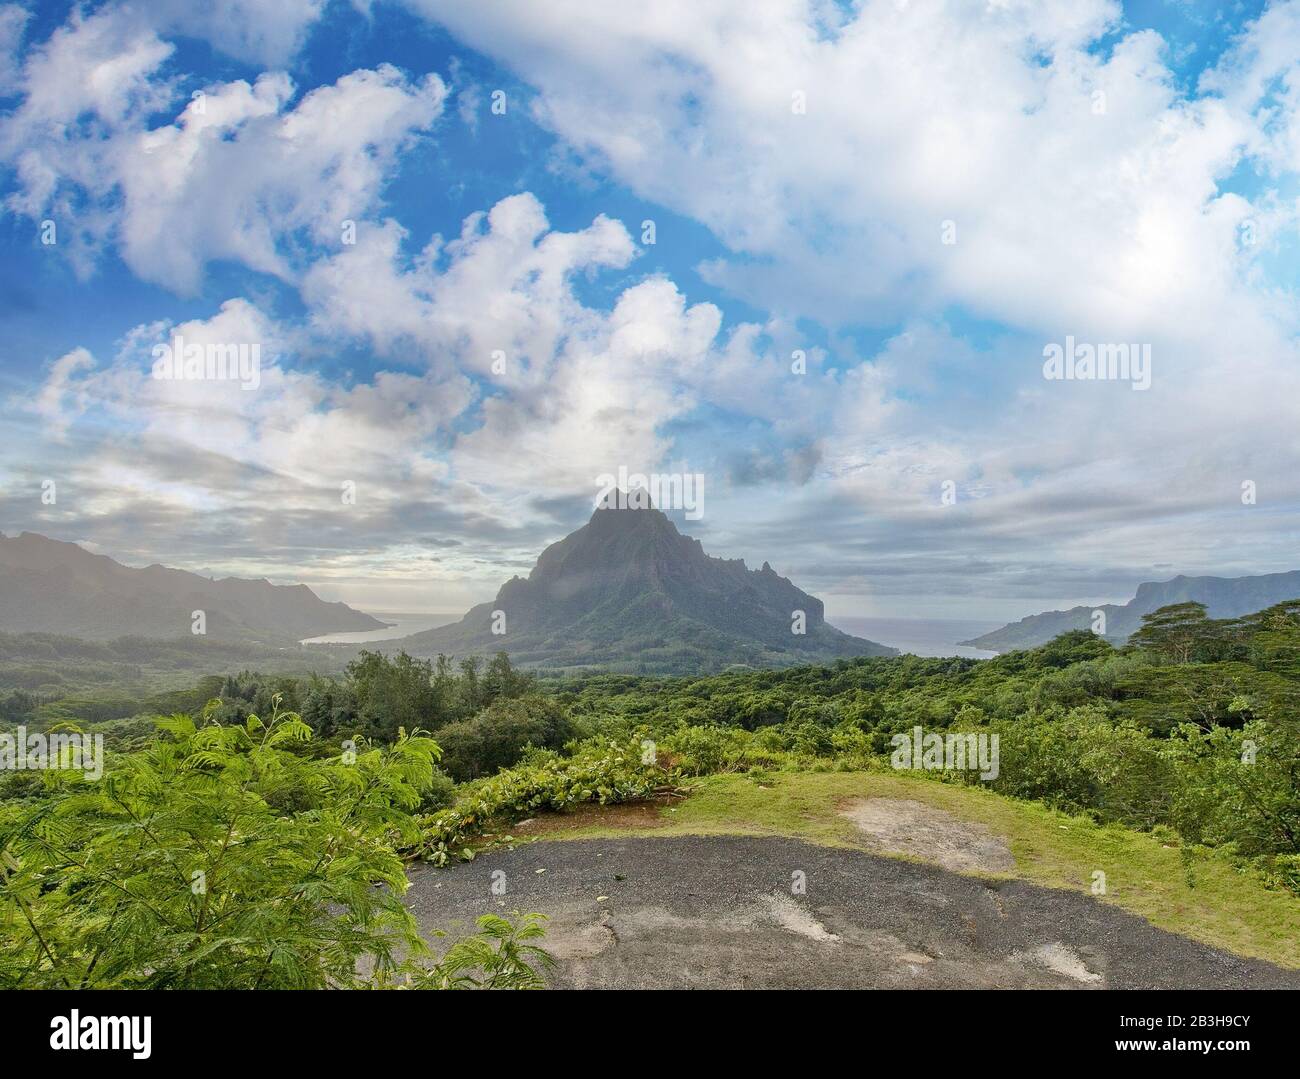 Panoramic sunset view of Moorea mountain landscape, French Polynesia. Stock Photo